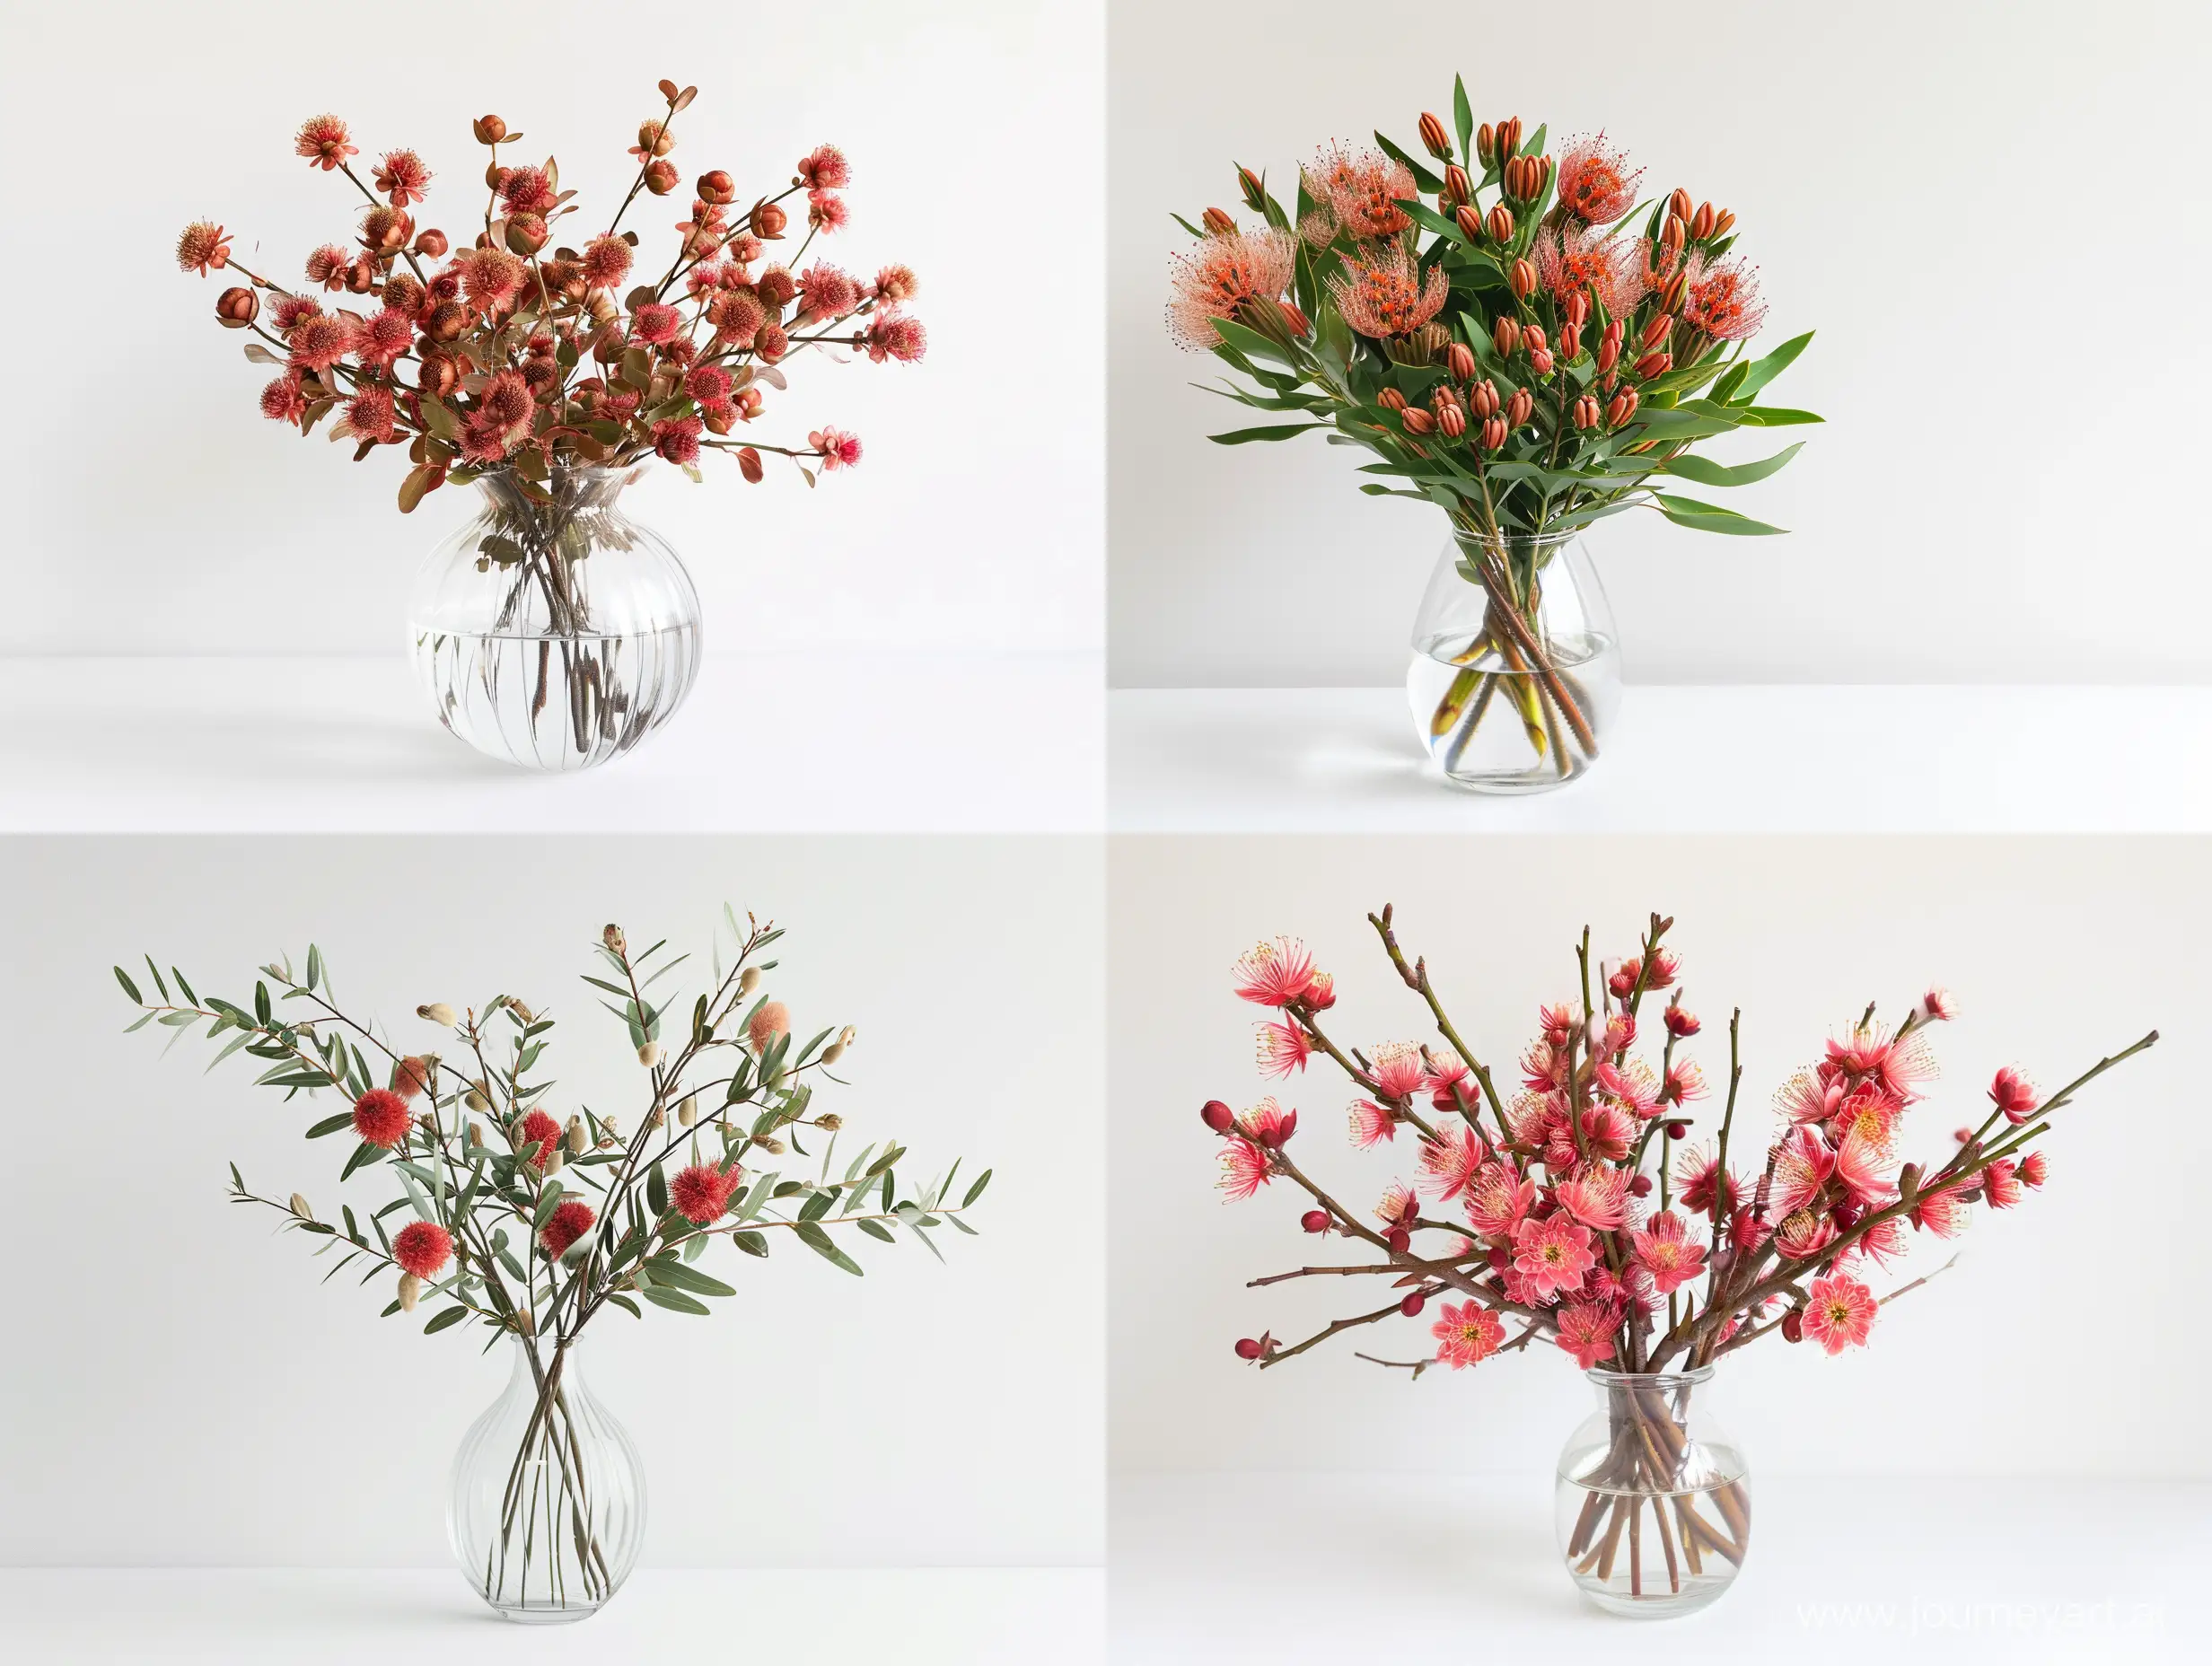 Exquisite-Red-Gum-Nut-Blossoms-and-Proteus-Arrangement-in-Clear-Glass-Vase-on-White-Background